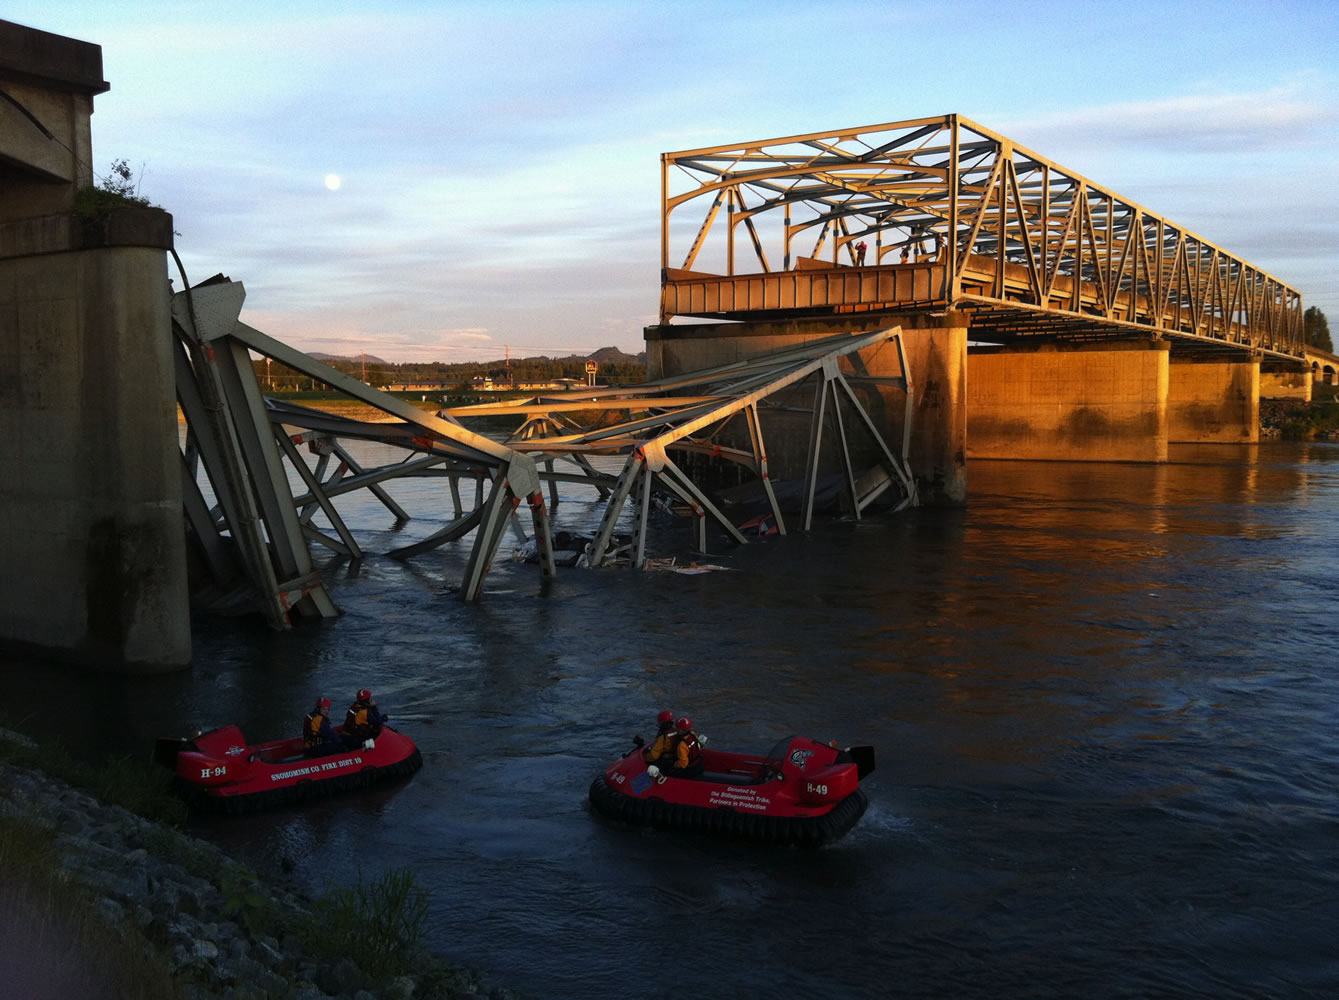 A portion of the Interstate 5 bridge is submerged after it collapsed into the Skagit River dumping vehicles and people into the water in Mount Vernon on Thursday.